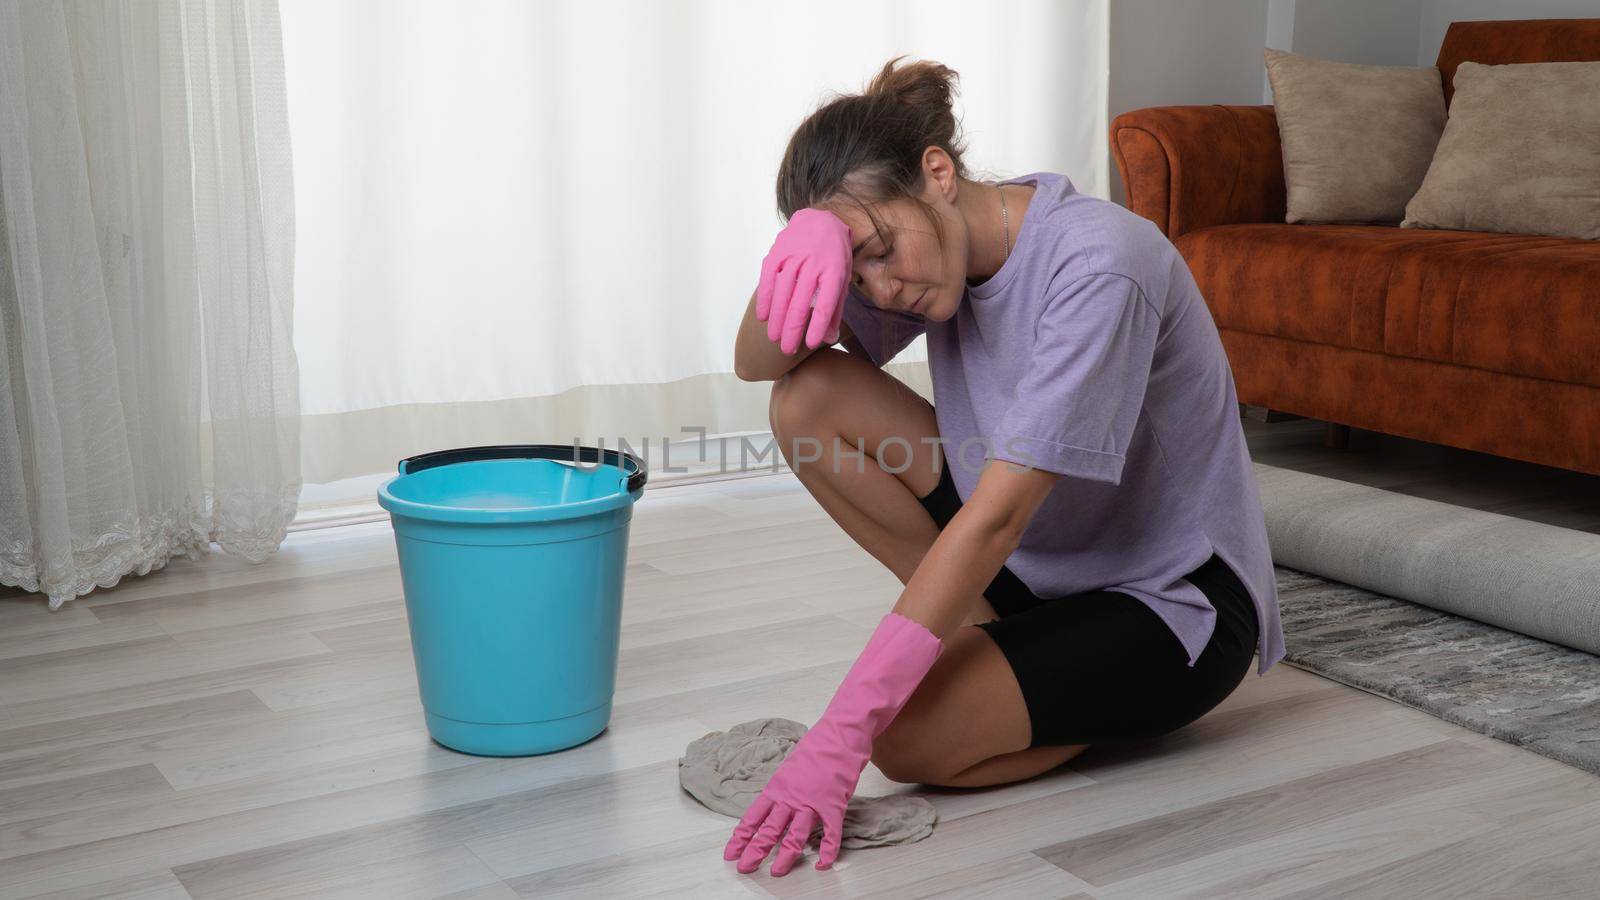 A tired woman washes the floor with a rag on her lap by voktybre